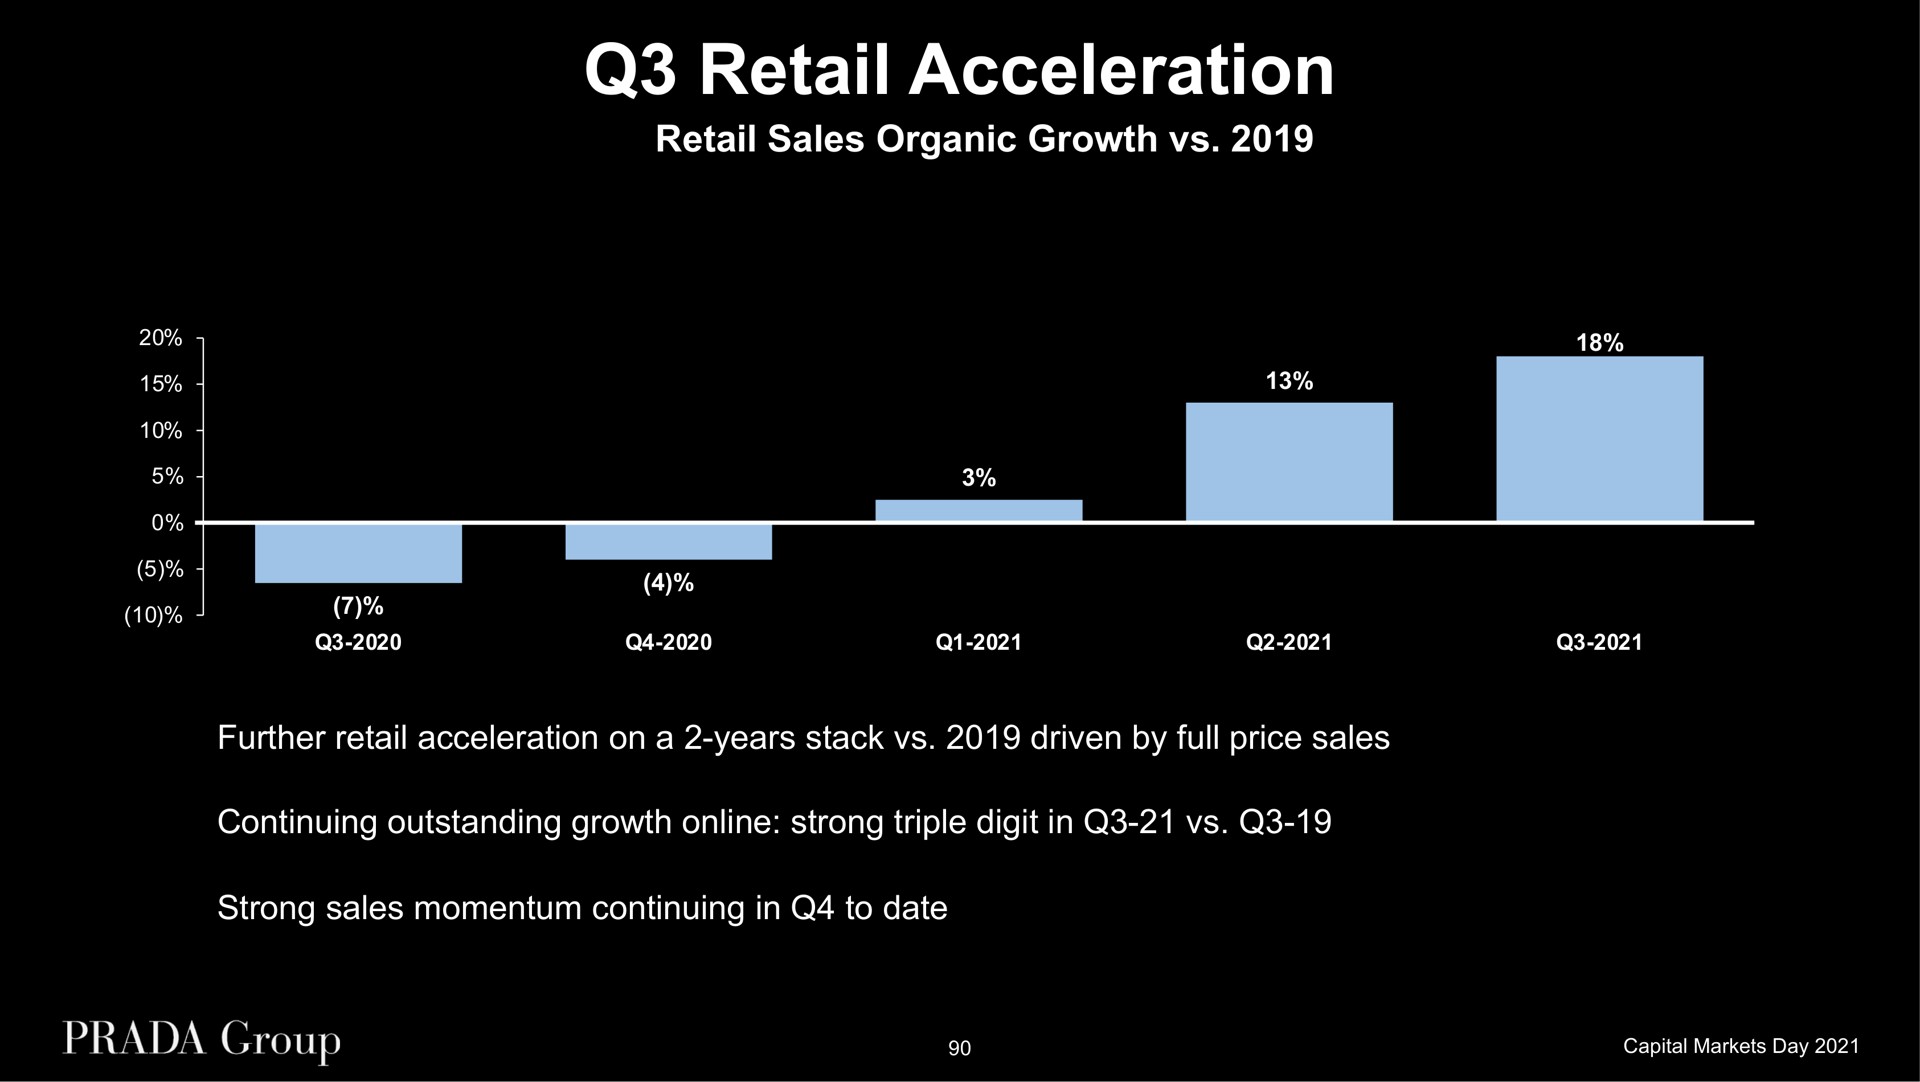 retail acceleration retail sales organic growth further retail acceleration on a years stack driven by full price sales continuing outstanding growth strong triple digit in strong sales momentum continuing in to date | Prada